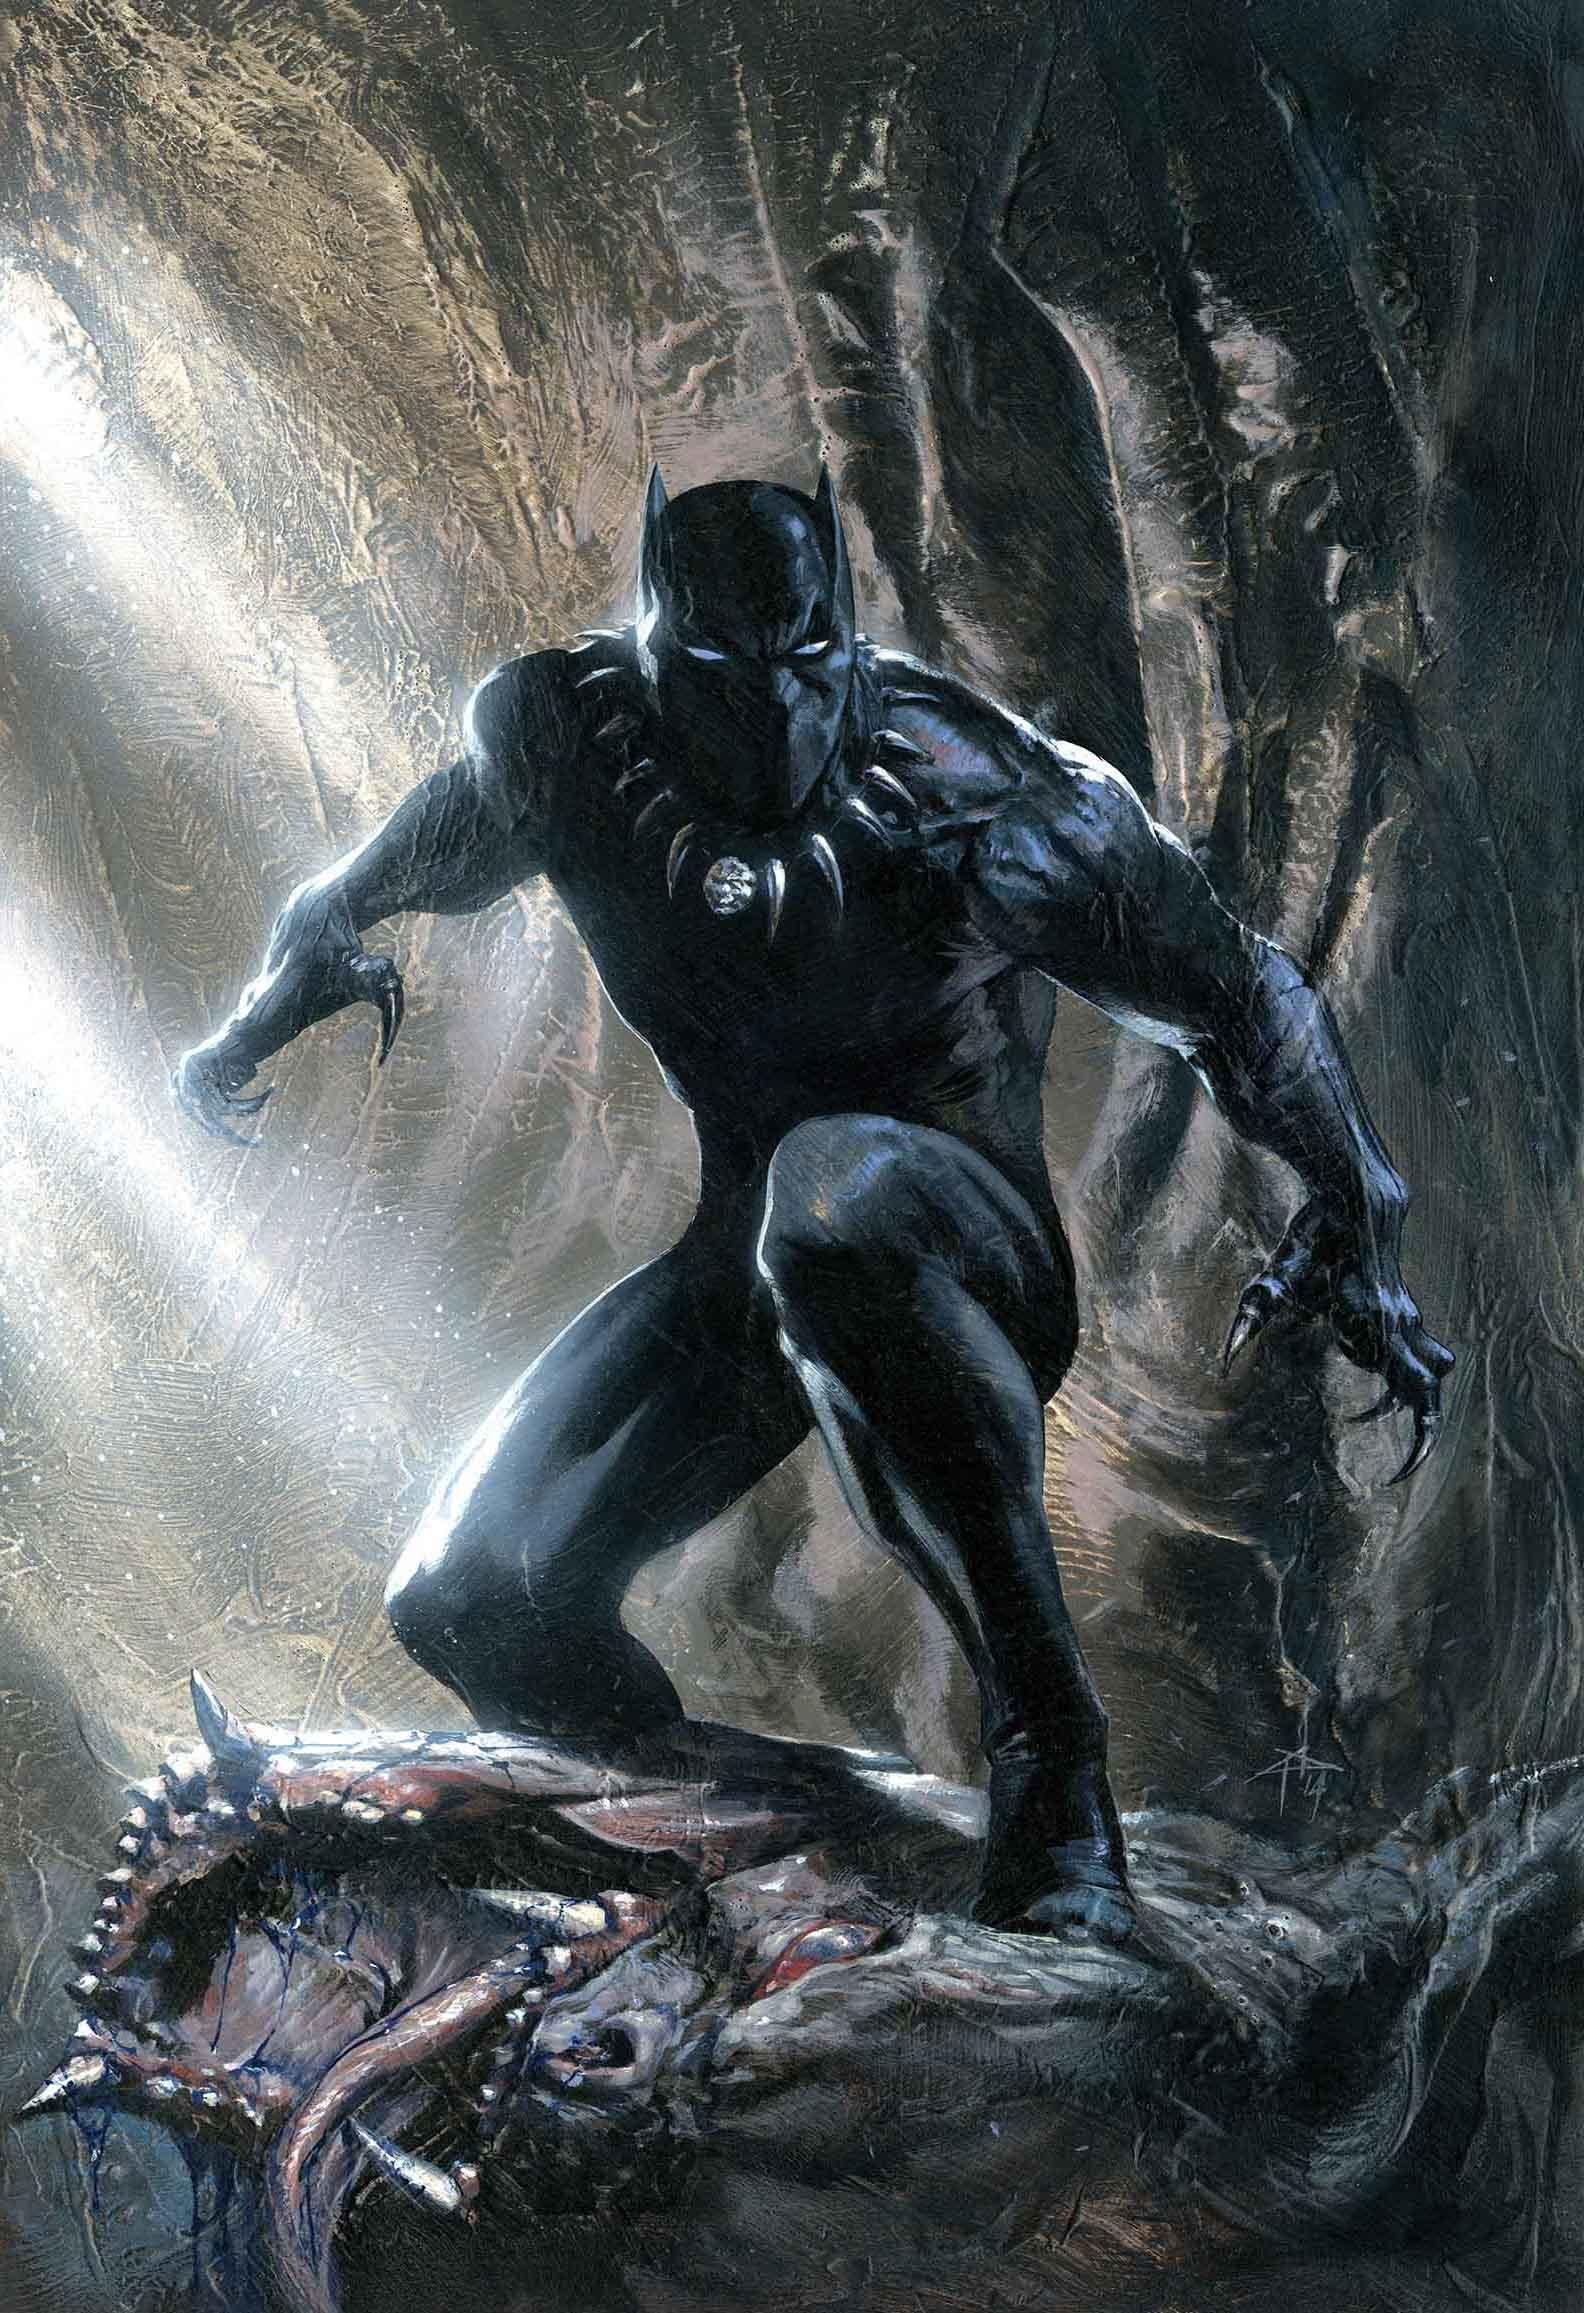 Black Panther Hd Iphone Wallpapers Wallpaper Cave